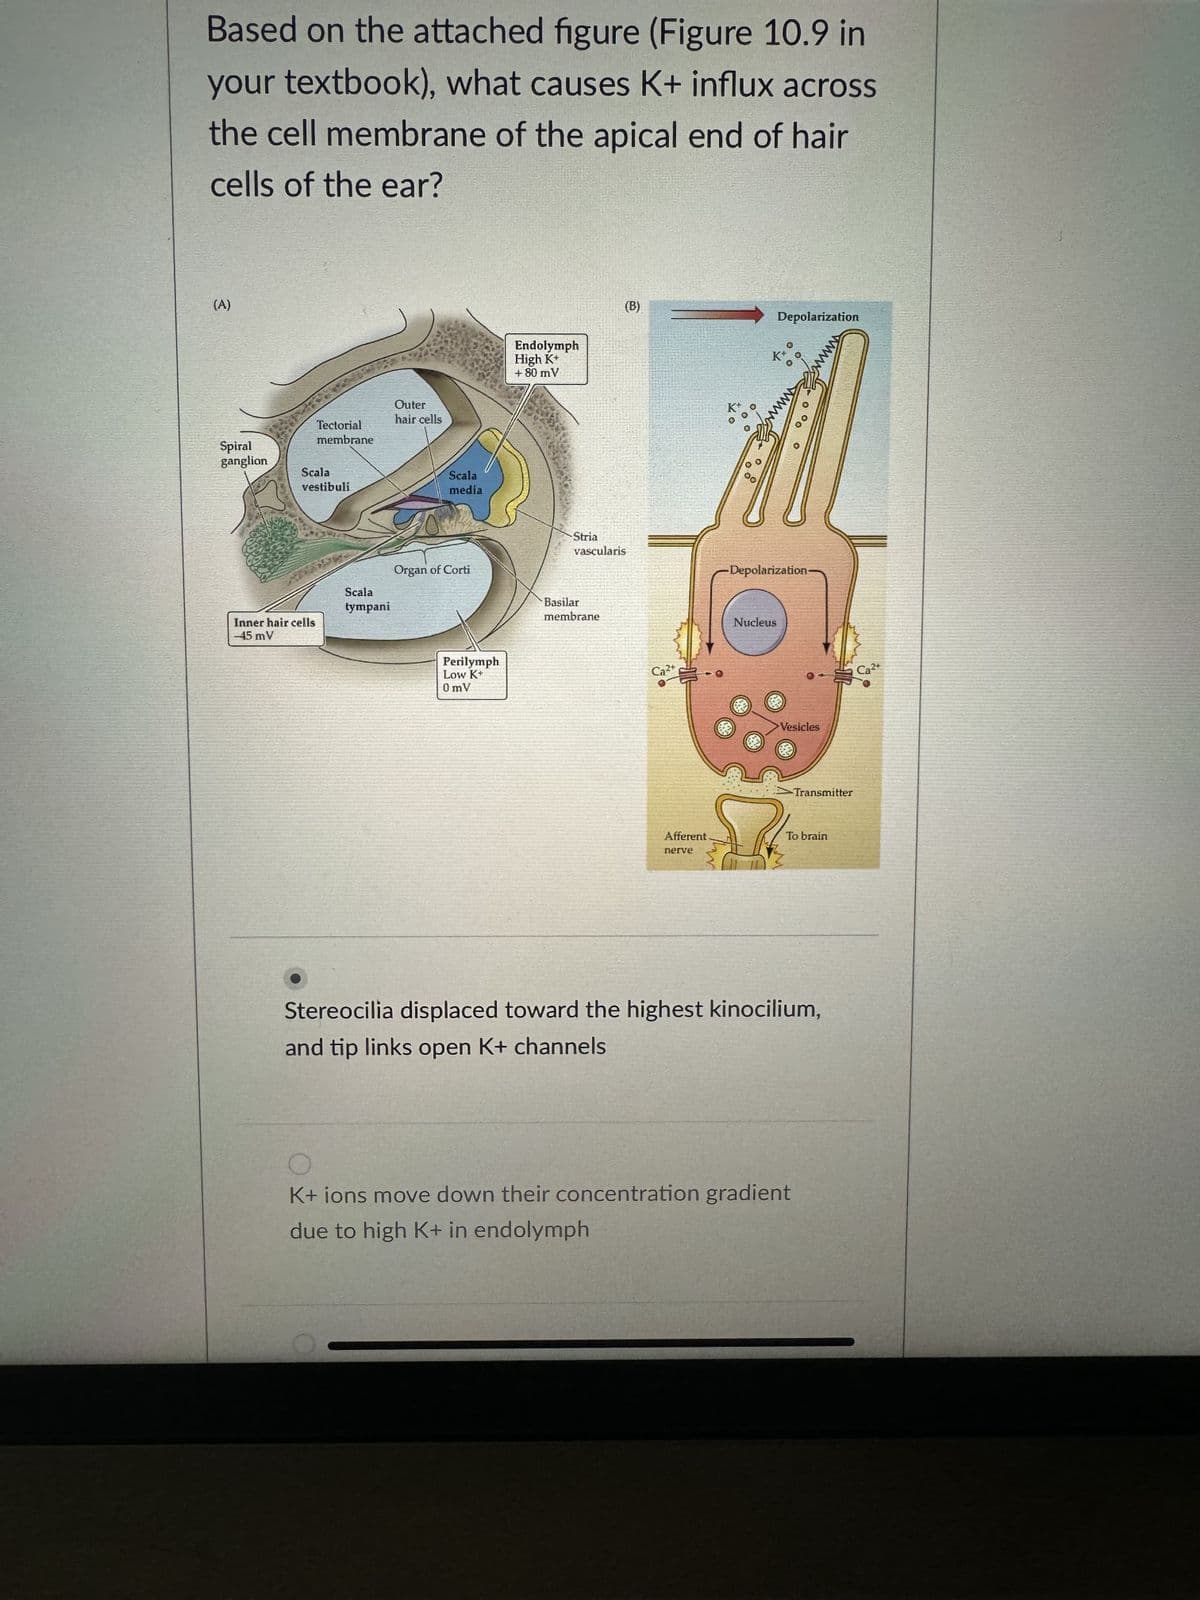 Based on the attached figure (Figure 10.9 in
your textbook), what causes K+ influx across
the cell membrane of the apical end of hair
cells of the ear?
(A)
Spiral
ganglion
Tectorial
membrane
Scala
vestibuli
Inner hair cells
-45 mV
Scala
tympani
Outer
hair cells
Scala
media
Organ of Corti
Perilymph
Low K+
0mV
Endolymph
High K+
+ 80 mV
(B)
Stria
vascularis
Basilar
membrane
Ca²+
Afferent.
nerve
O
O
00
Depolarization
Nucleus
O
00
O
-Depolarization-
Vesicles
K+ ions move down their concentration gradient
due to high K+ in endolymph
Transmitter
To brain
Stereocilia displaced toward the highest kinocilium,
and tip links open K+ channels